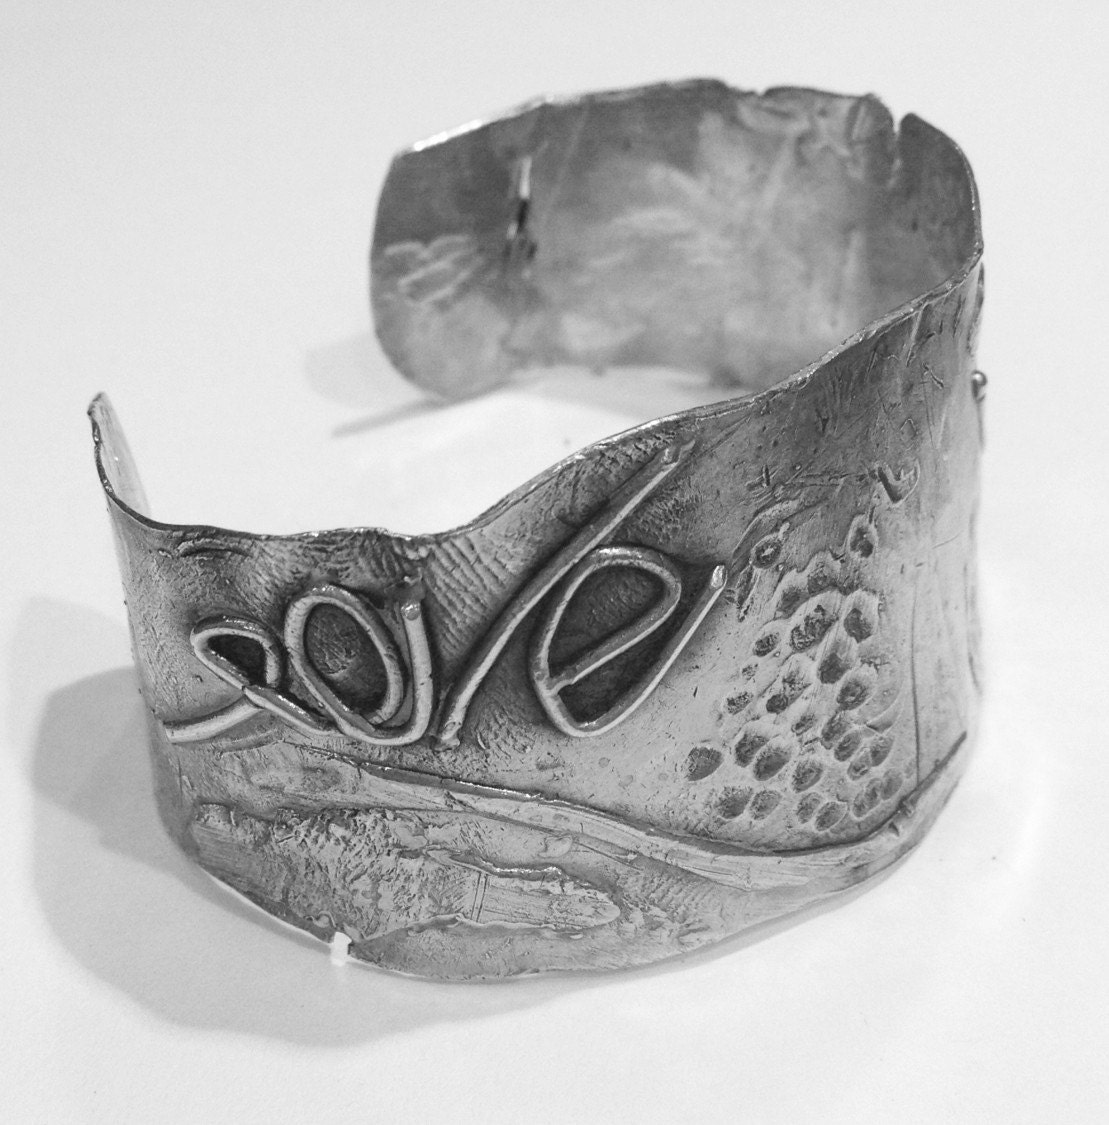 Sterling Silver 925 Love is all I need Cuff Bracelet